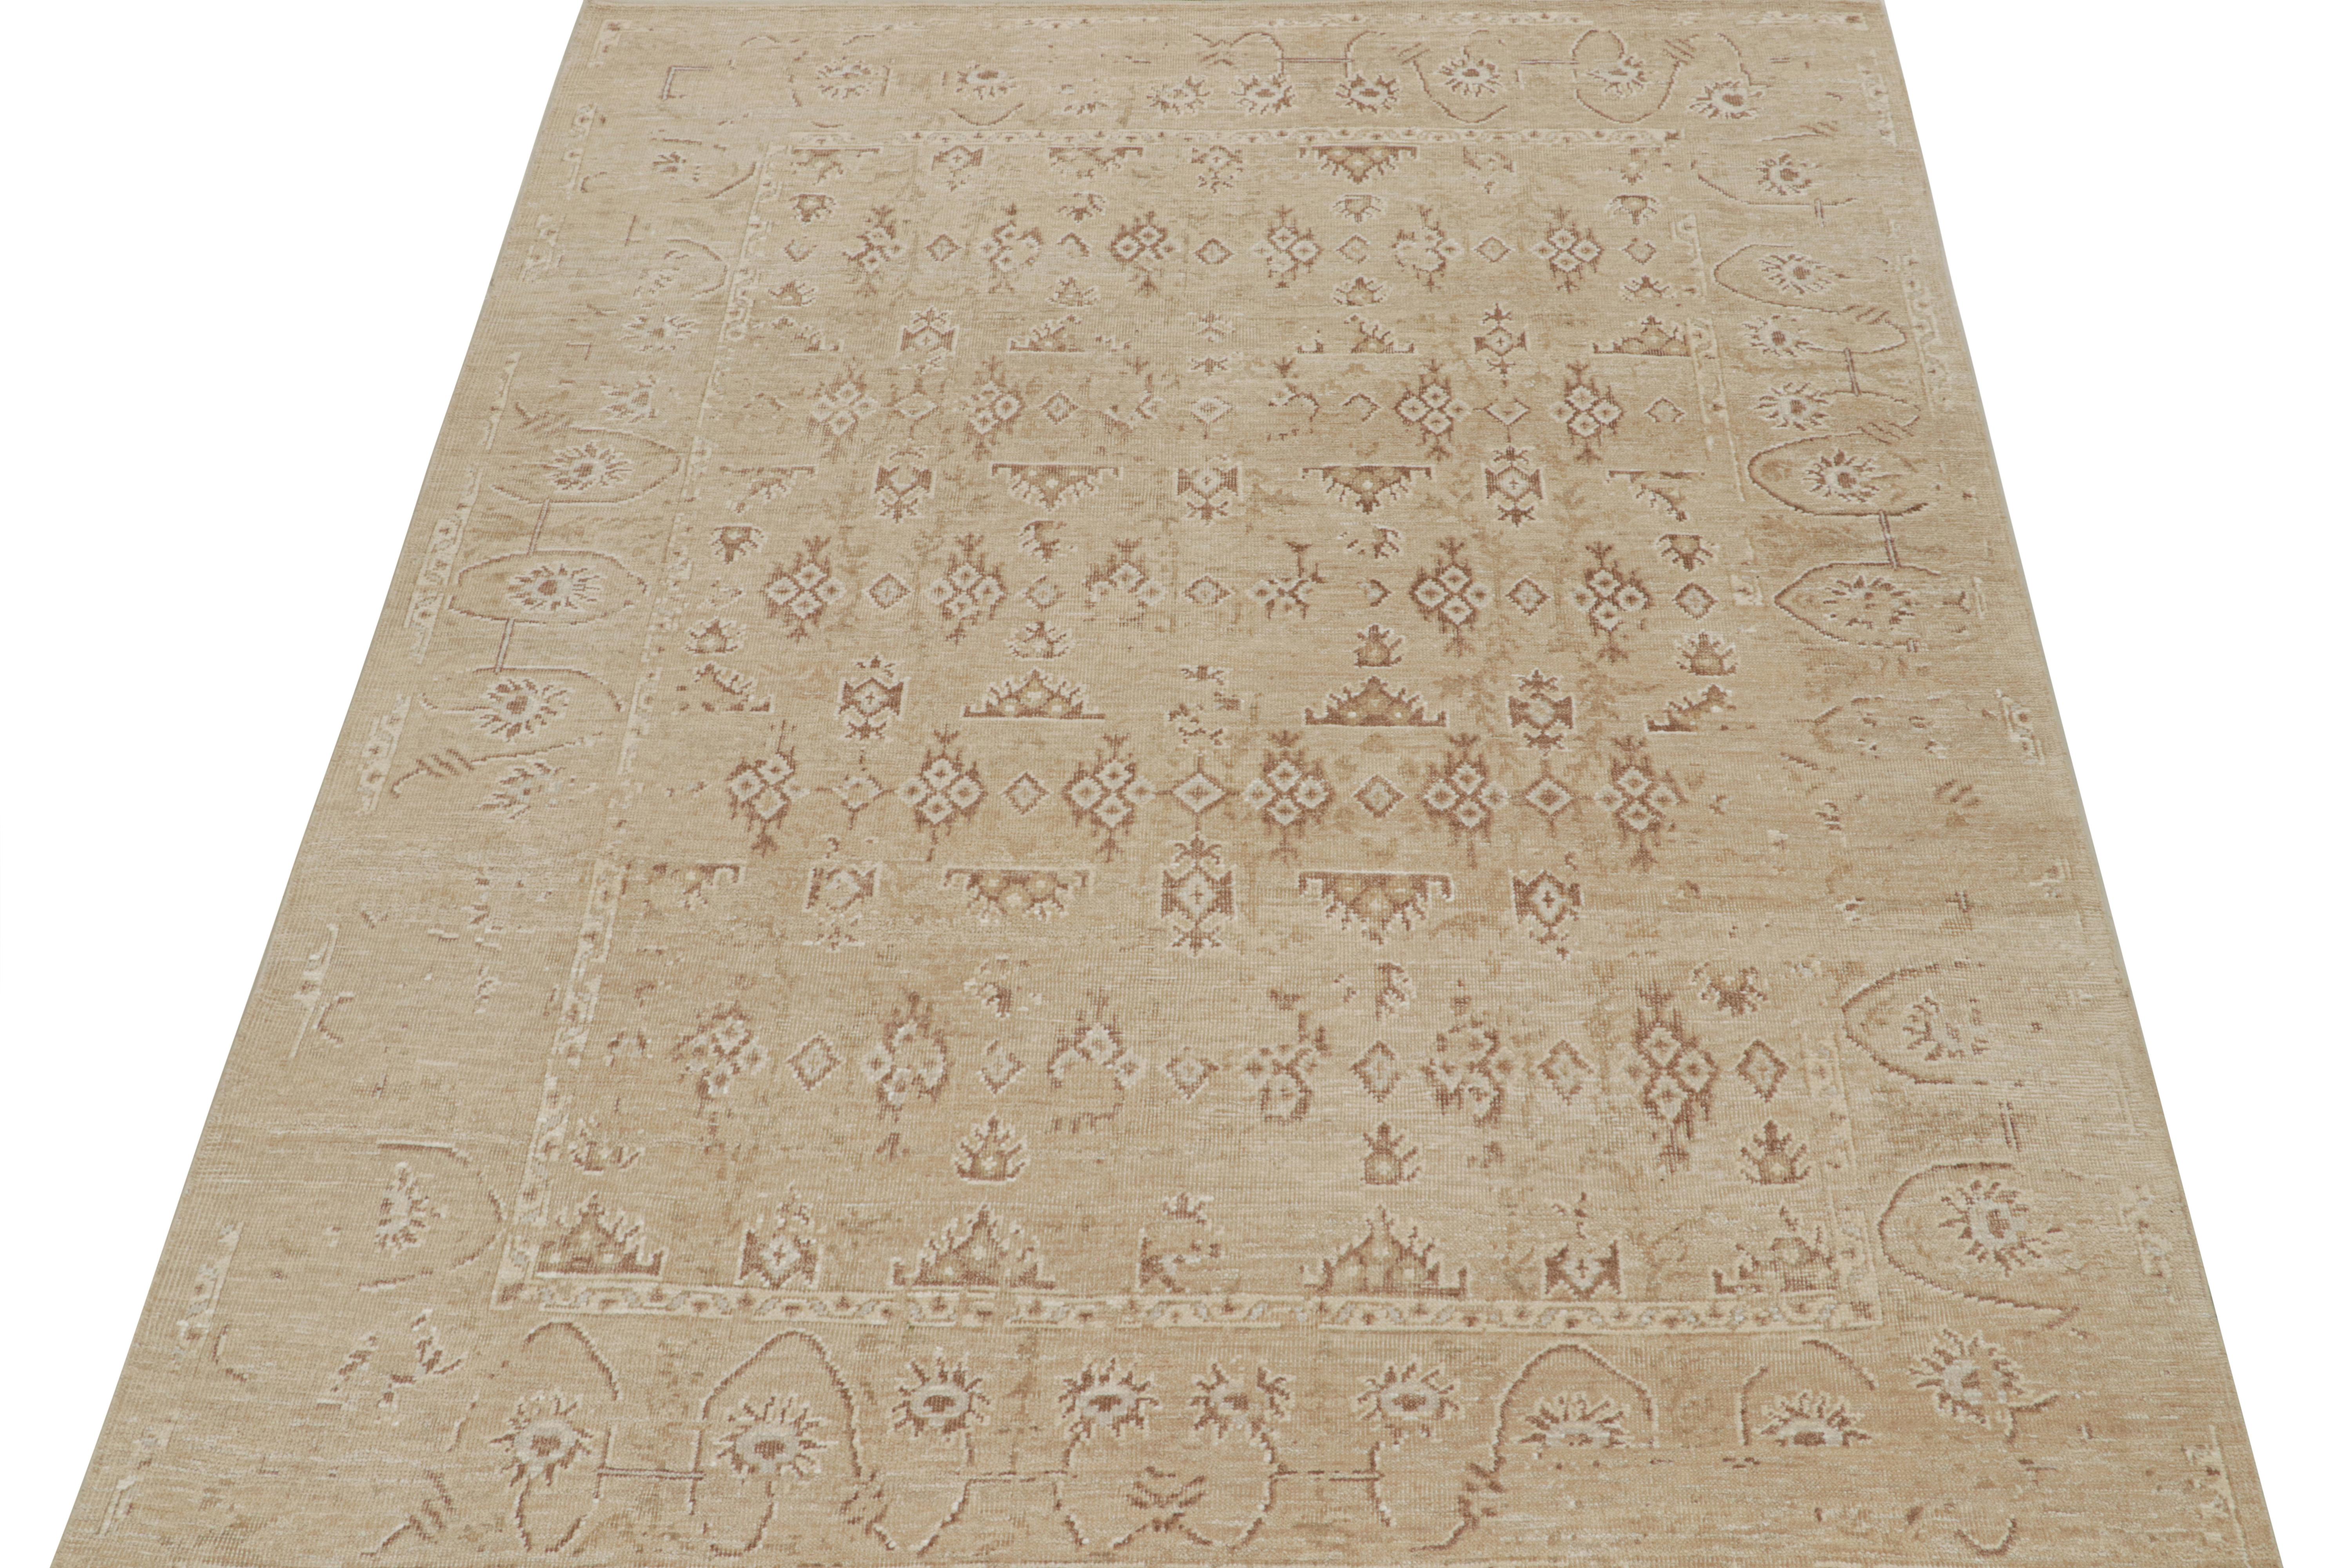 Indian Rug & Kilim’s Oushak Style Rug with Floral Patterns in Beige and Rust For Sale